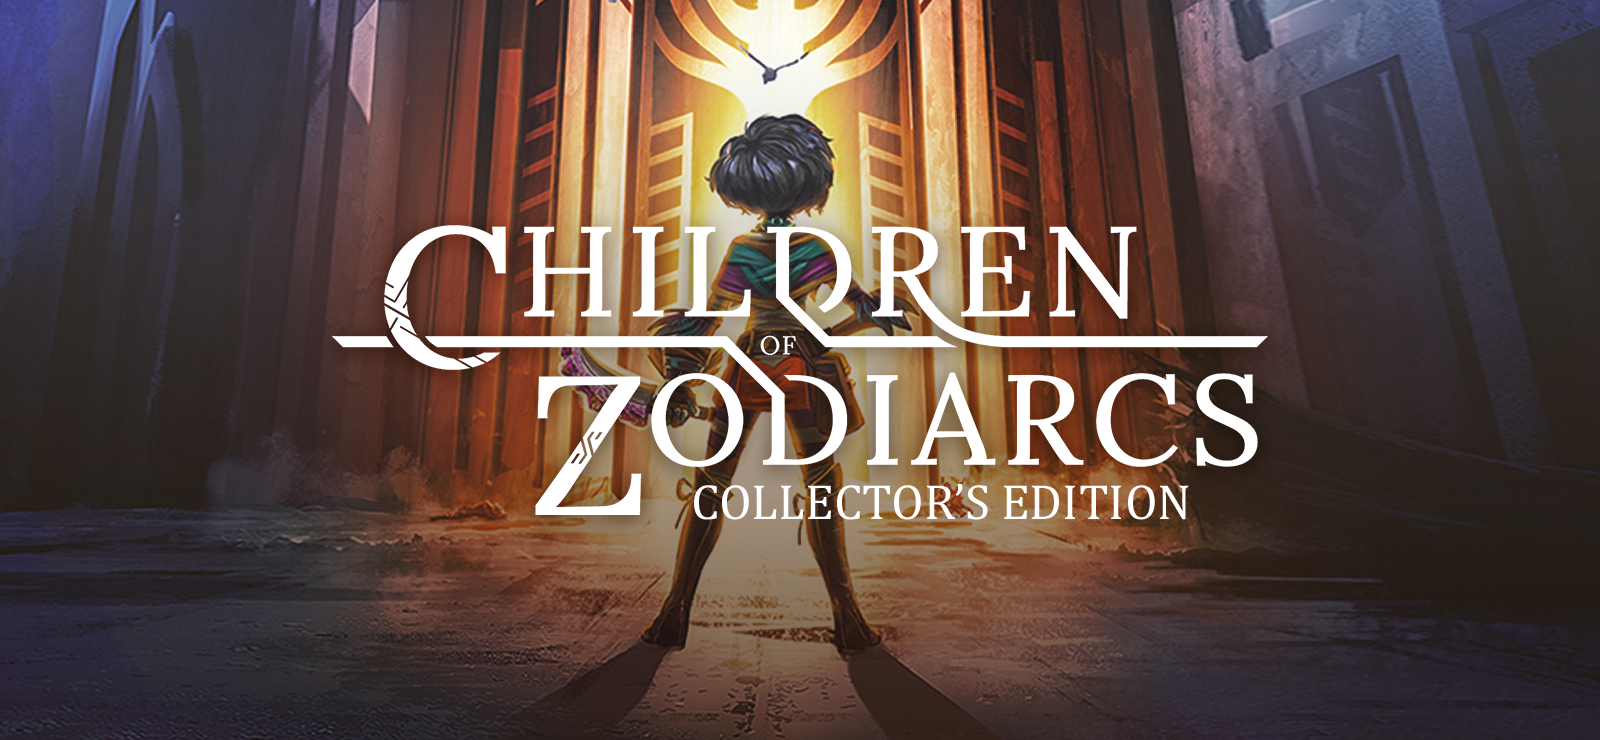 Children Of Zodiarcs Collector's Edition